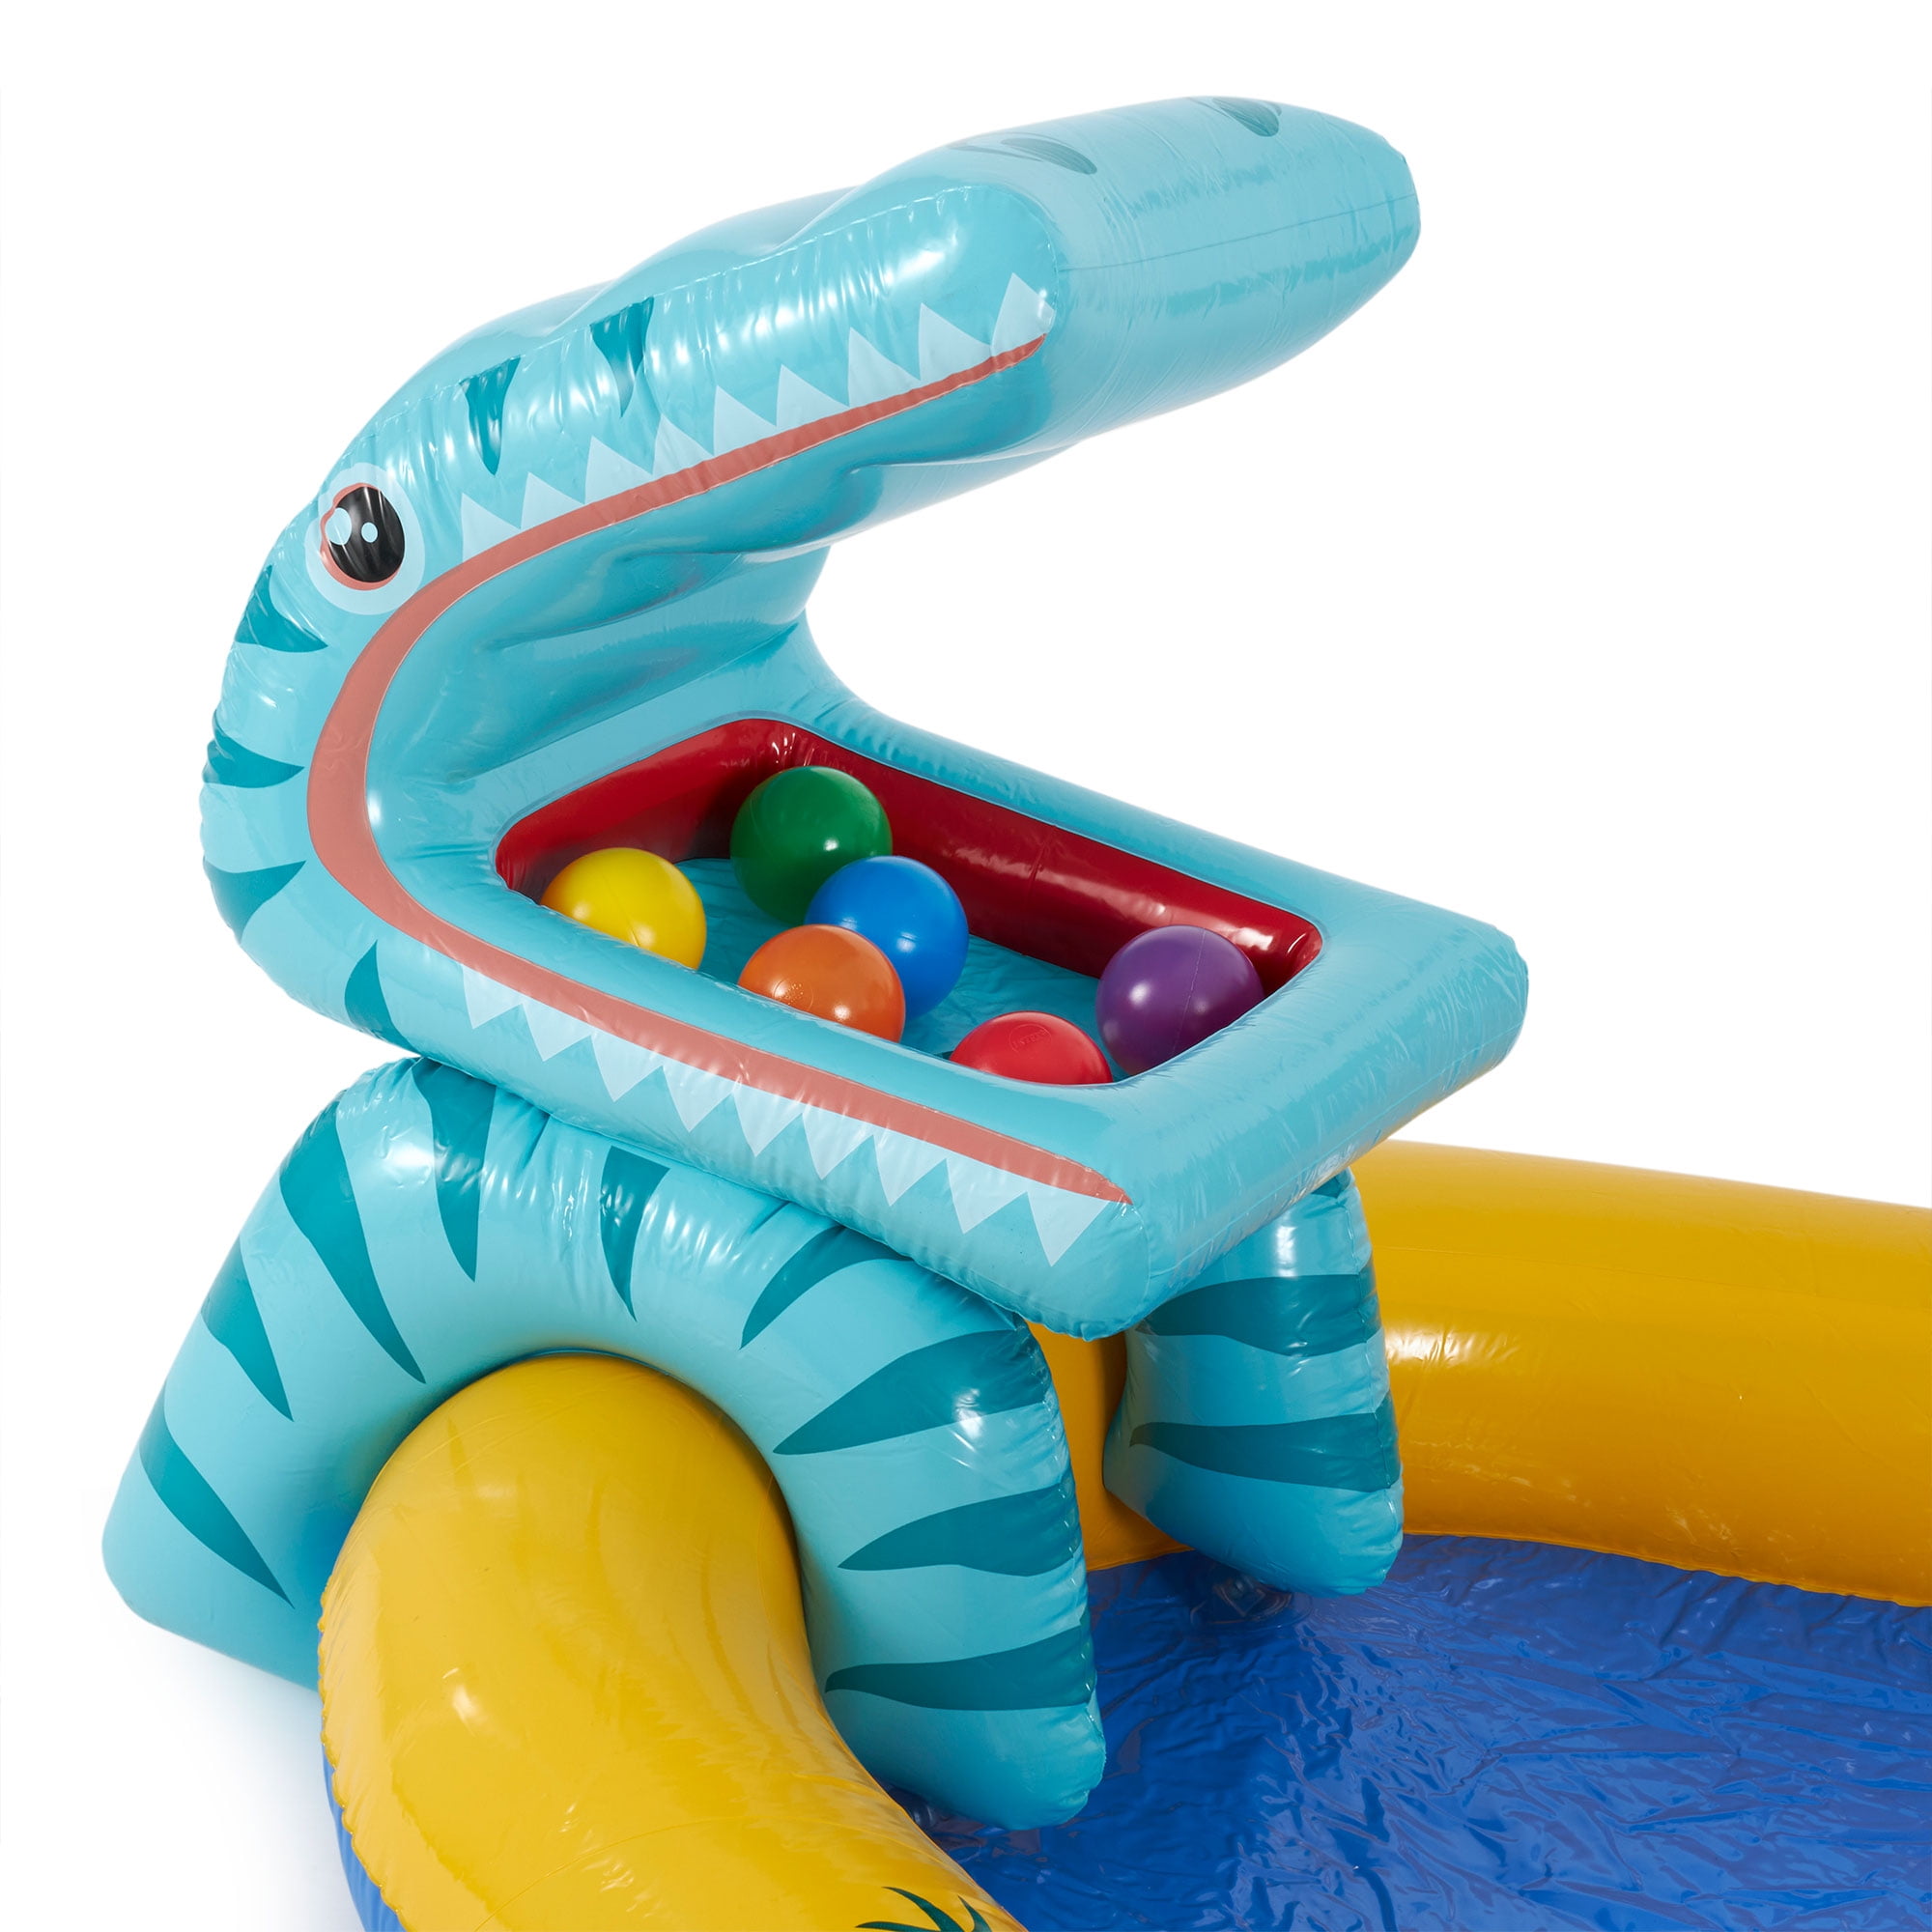 INTEX Little Dino Inflatable Play Center with Slide